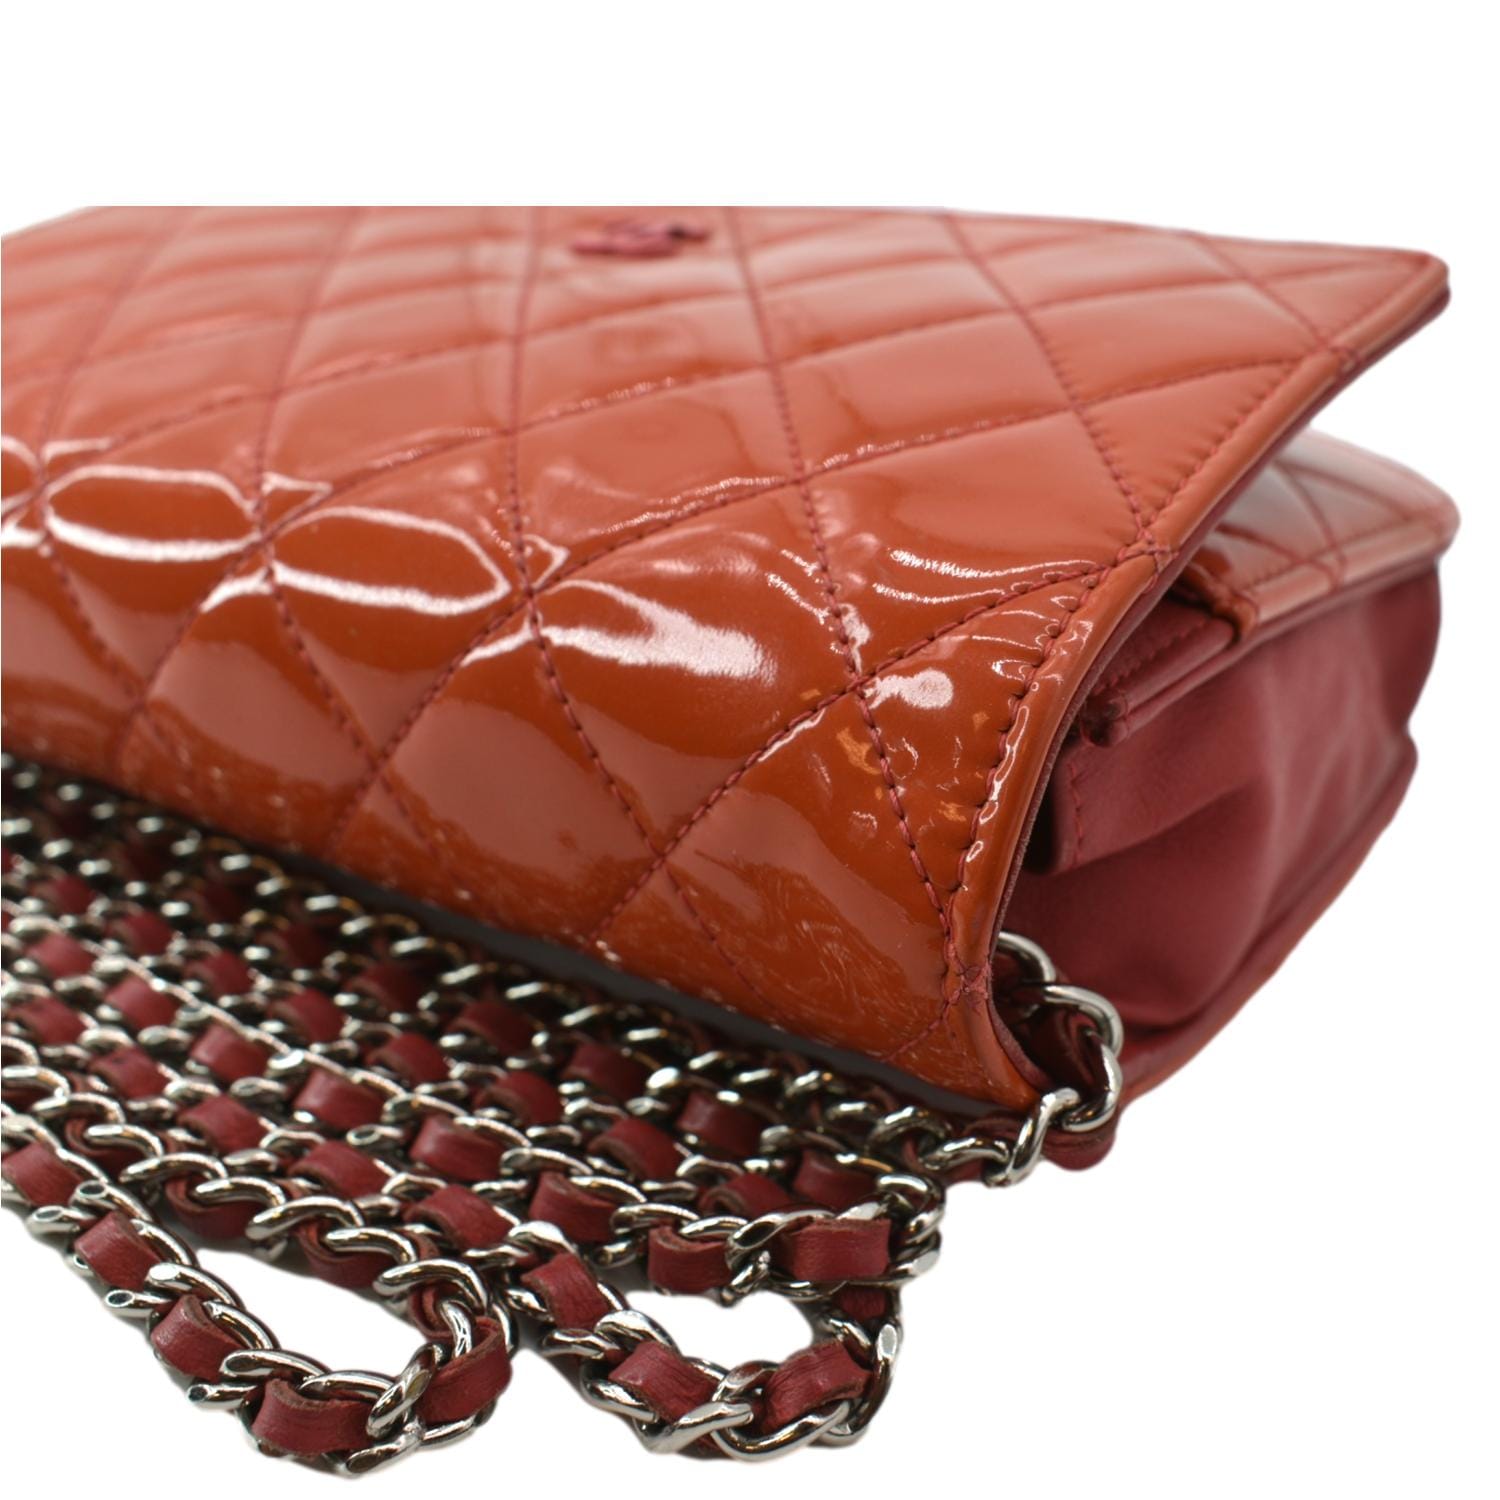 Chanel Red Patent Leather Camellia WOC Wallet On Chain Bag at 1stDibs